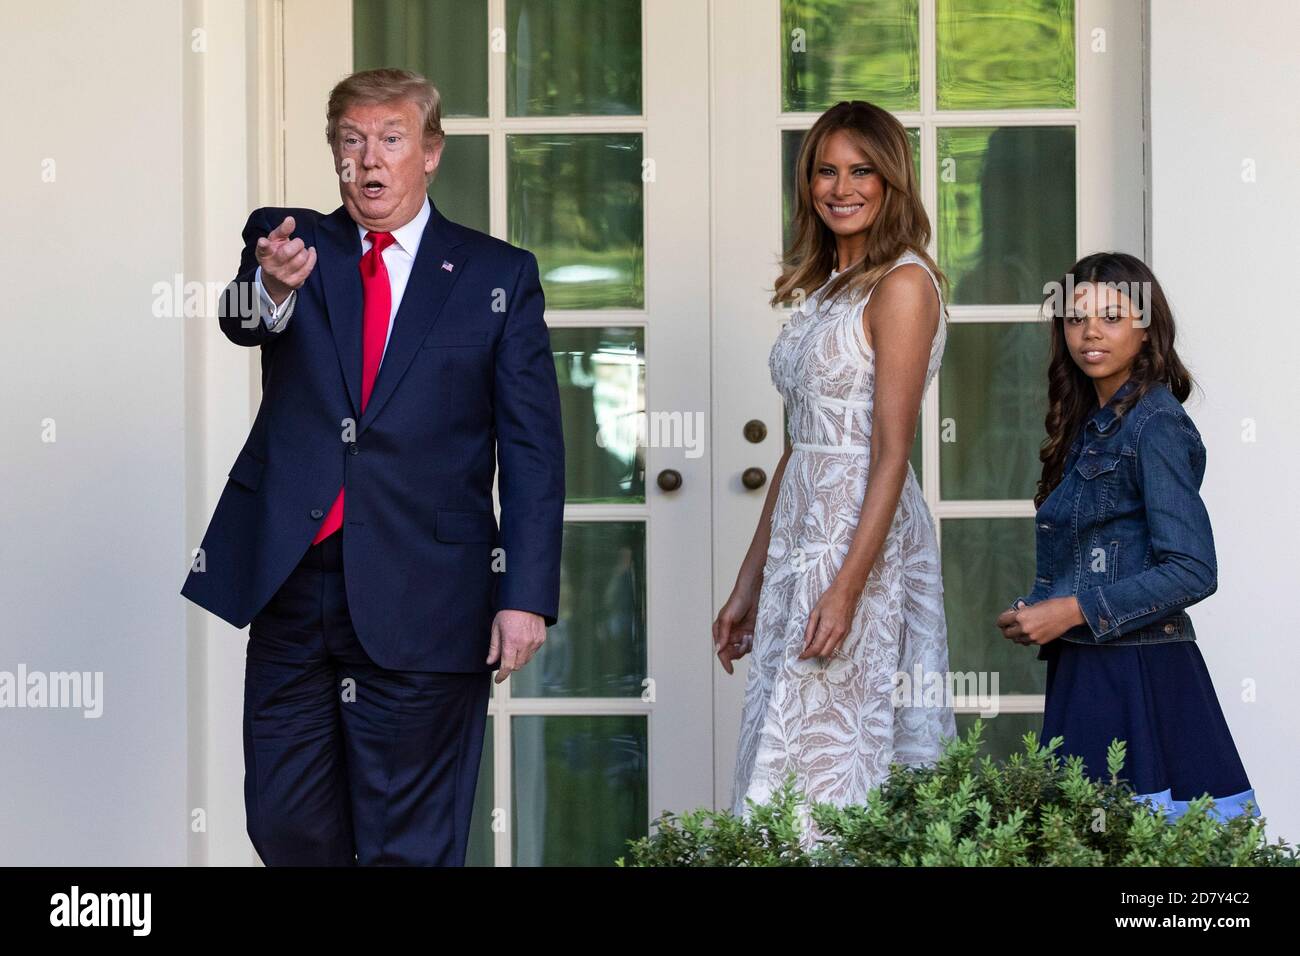 U.S. President Donald Trump gestures to the family of golfer Tiger Woods while First Lady Melania Trump and Woods's daughter Sam follow him into the Oval Office following a ceremony in the Rose Garden of the White House in Washington, D.C. on Monday, May 6, 2019. During the ceremony, Trump awarded Woods the Presidential Medal of Freedom to Woods.The Presidential Medal of Freedom is the highest honor a U.S. President can bestow on a civilian. Woods is the fourth golfer to receive the award. Credit: Alex Edelman/The Photo Access Stock Photo